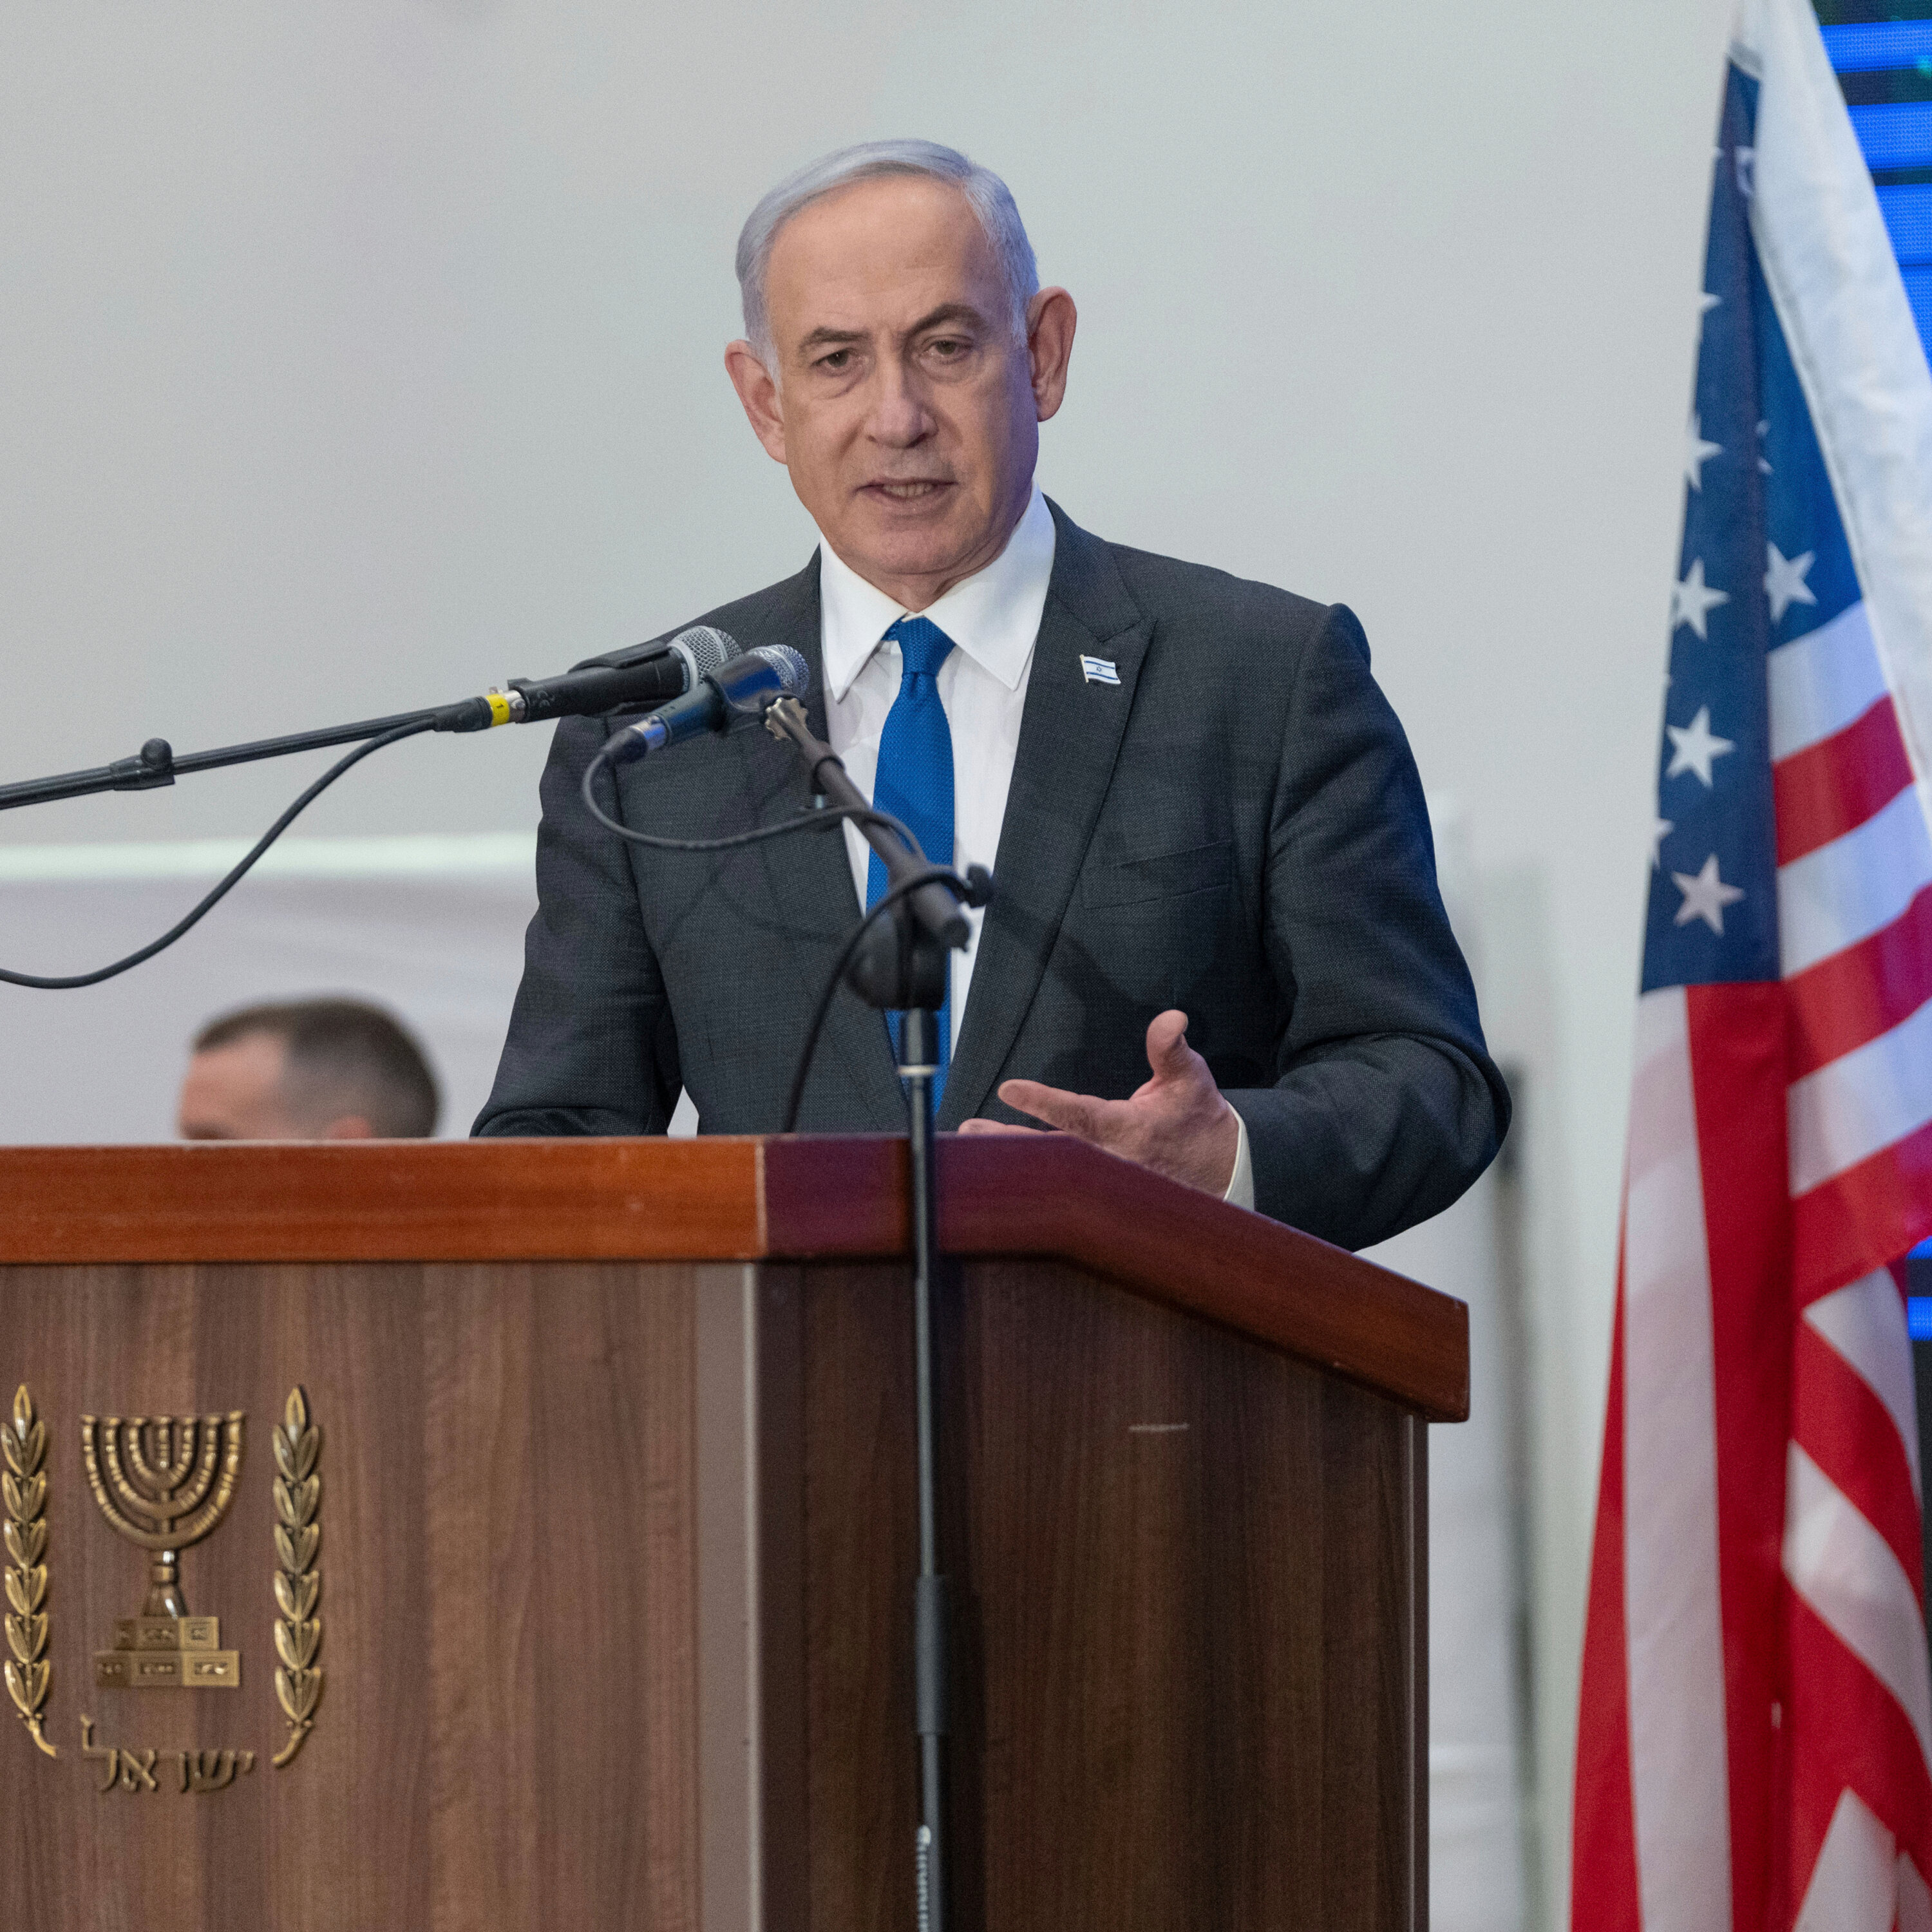 What Matters Now to Haviv Rettig Gur: Is Netanyahu an obstacle to victory?